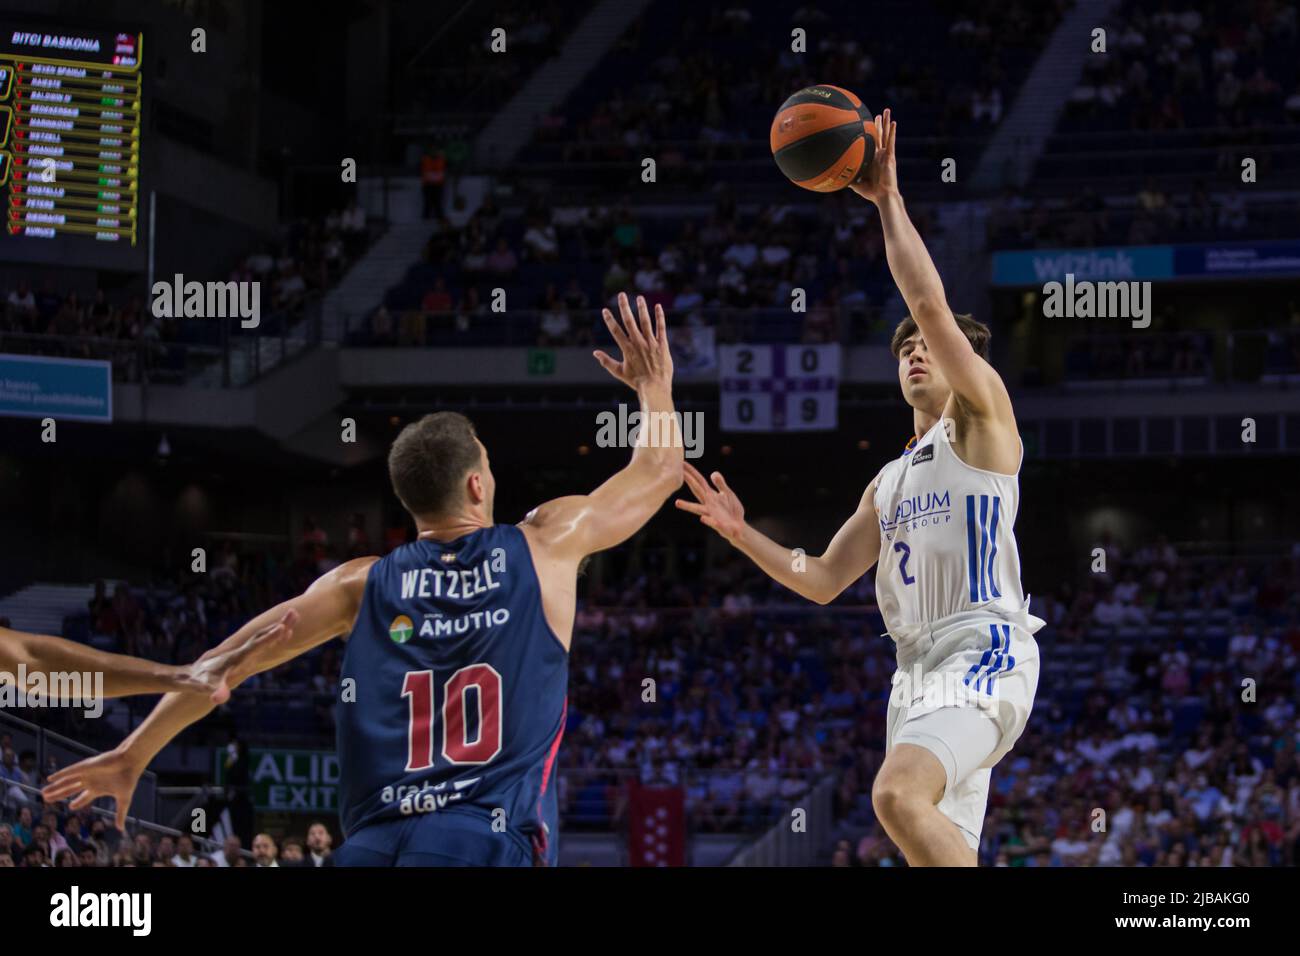 Madrid, Spain. 04th June, 2022. Juan Núñez (R) during Liga Endesa Playoff 2022 semifinals game 2 between Real Madrid and Bitci Baskonia celebrated at Wizink Center in Madrid (Spain), June 4th 2022. Real Madrid won 83 - 71 (Photo by Juan Carlos García Mate/Pacific Press) Credit: Pacific Press Media Production Corp./Alamy Live News Stock Photo